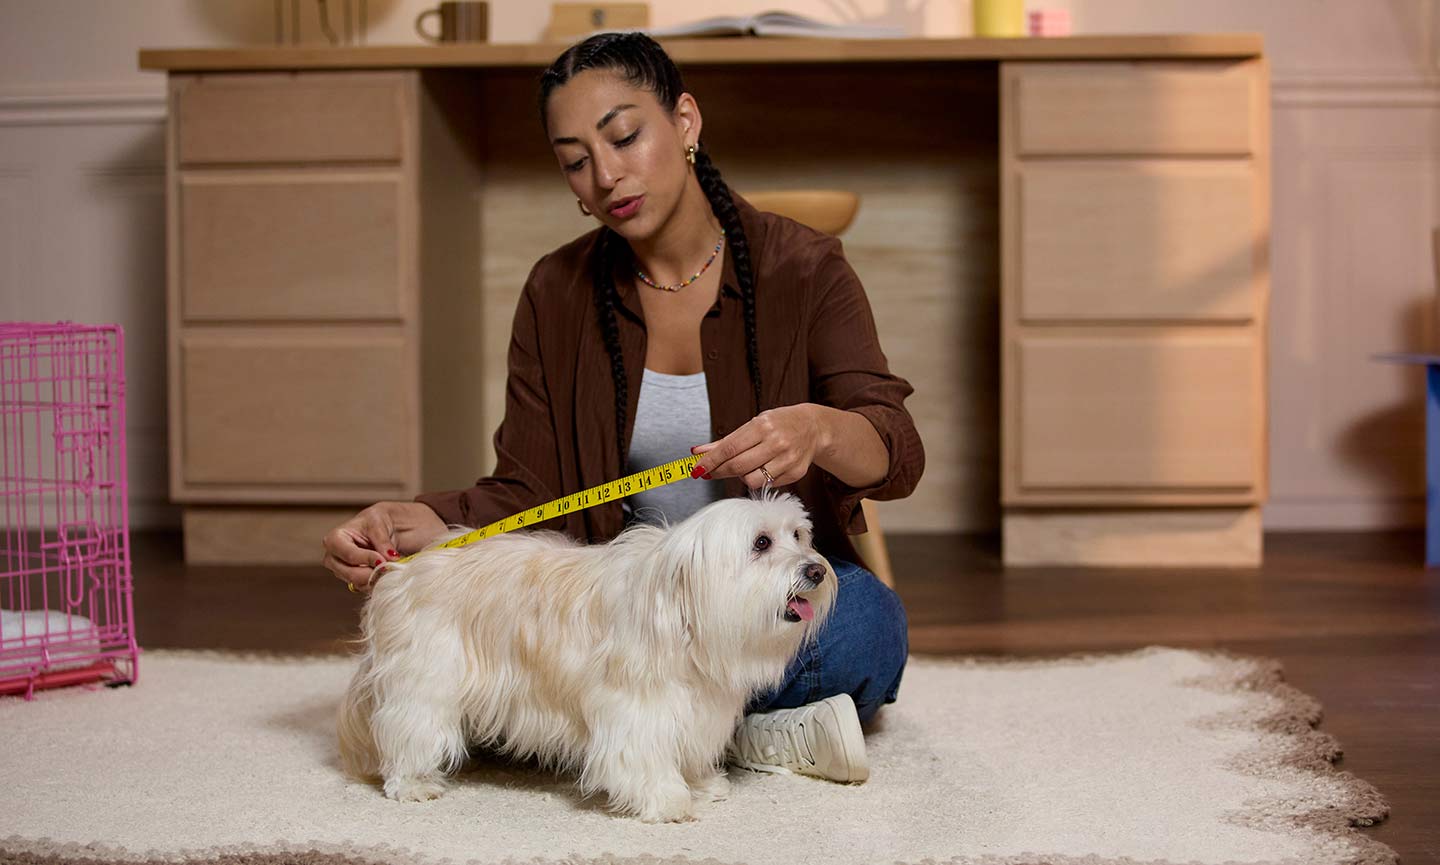 A woman measuring her dog's length